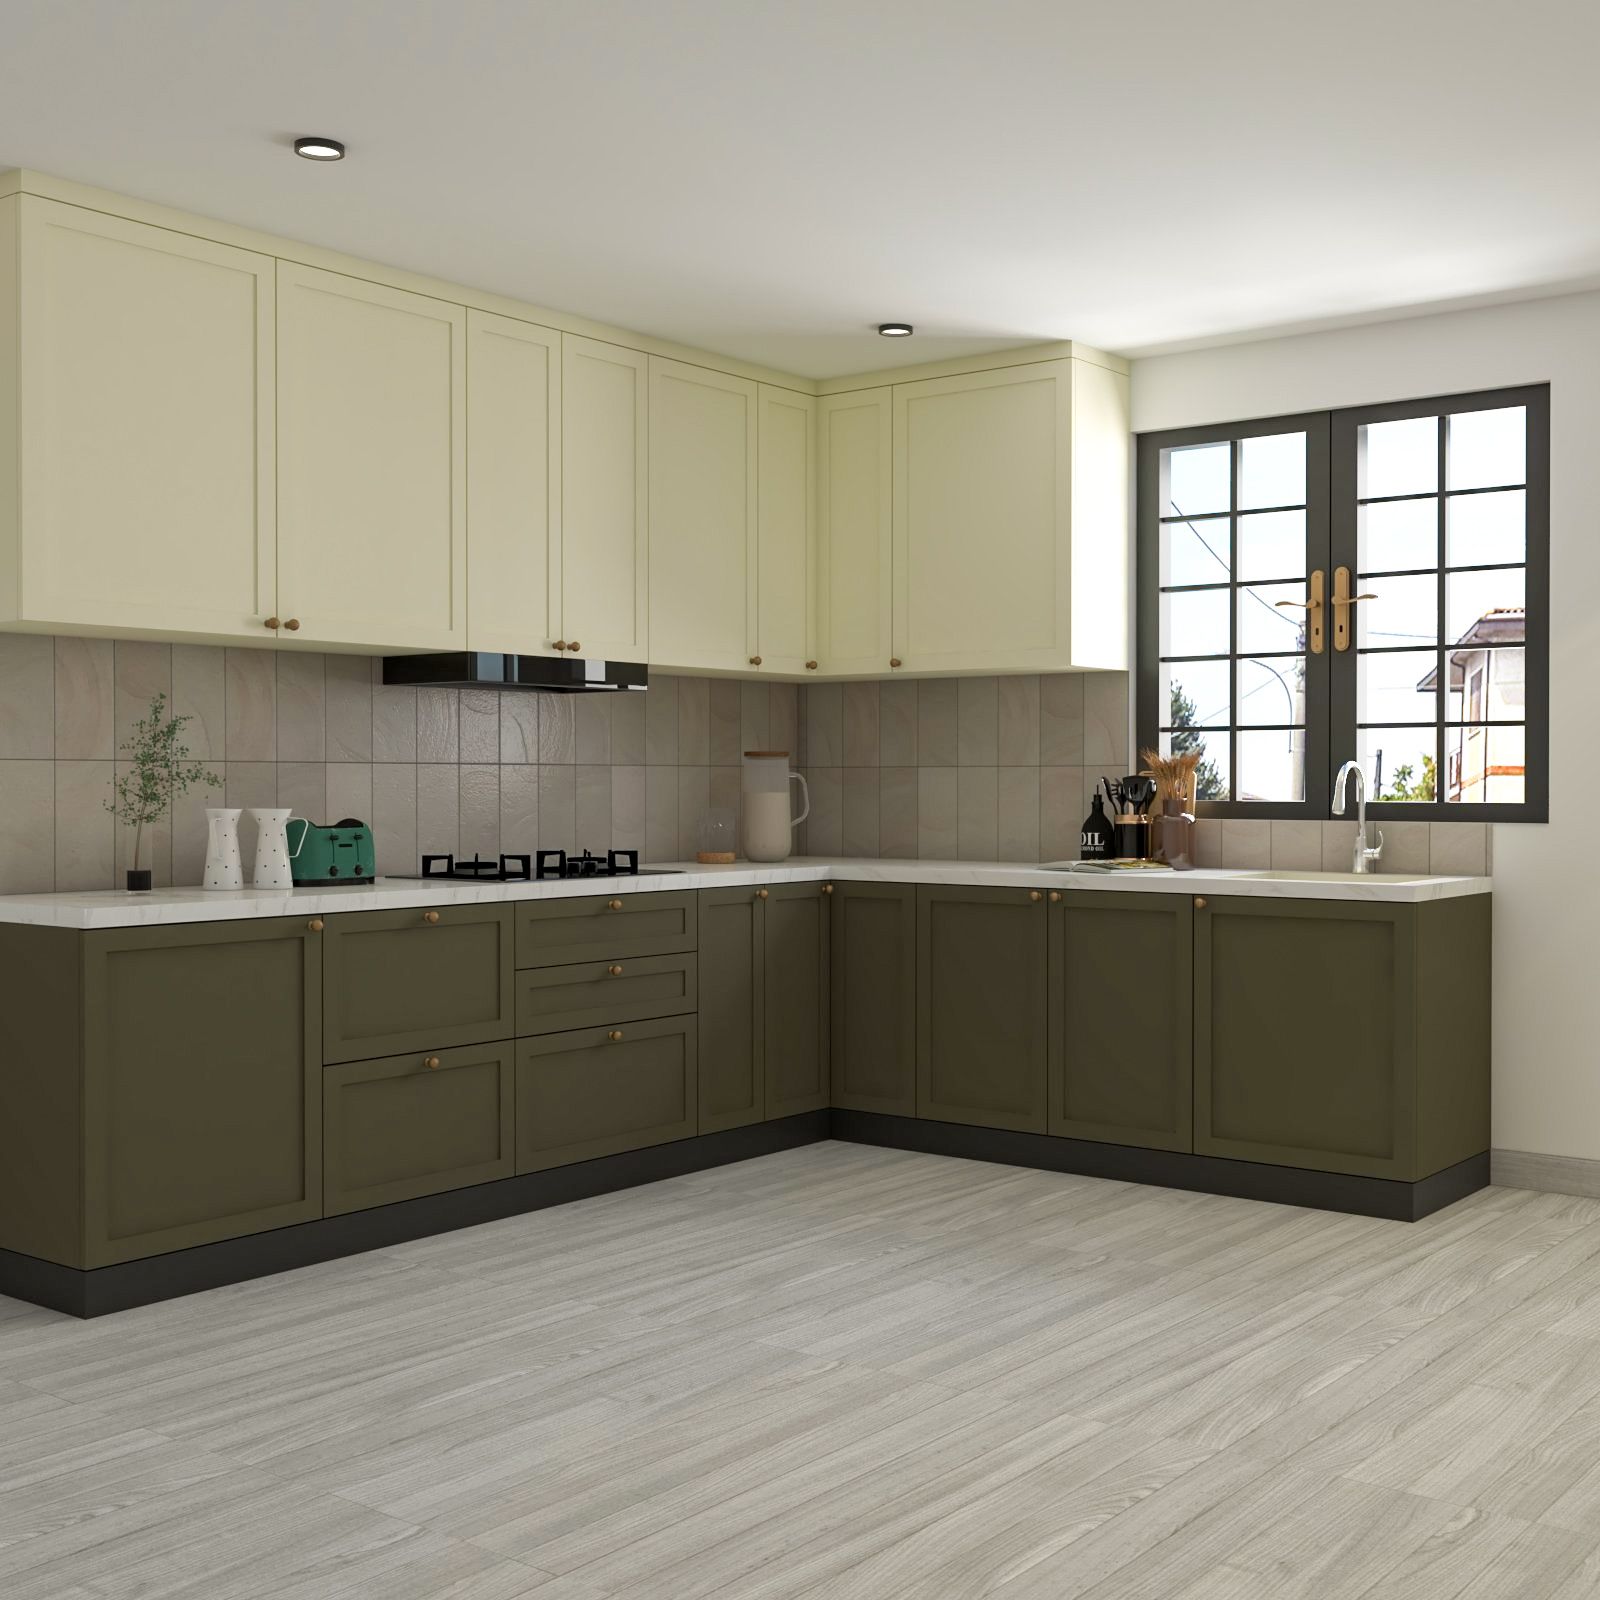 Contemporary L-Shaped Kitchen Design With Dark Green And Ivory Cabinets